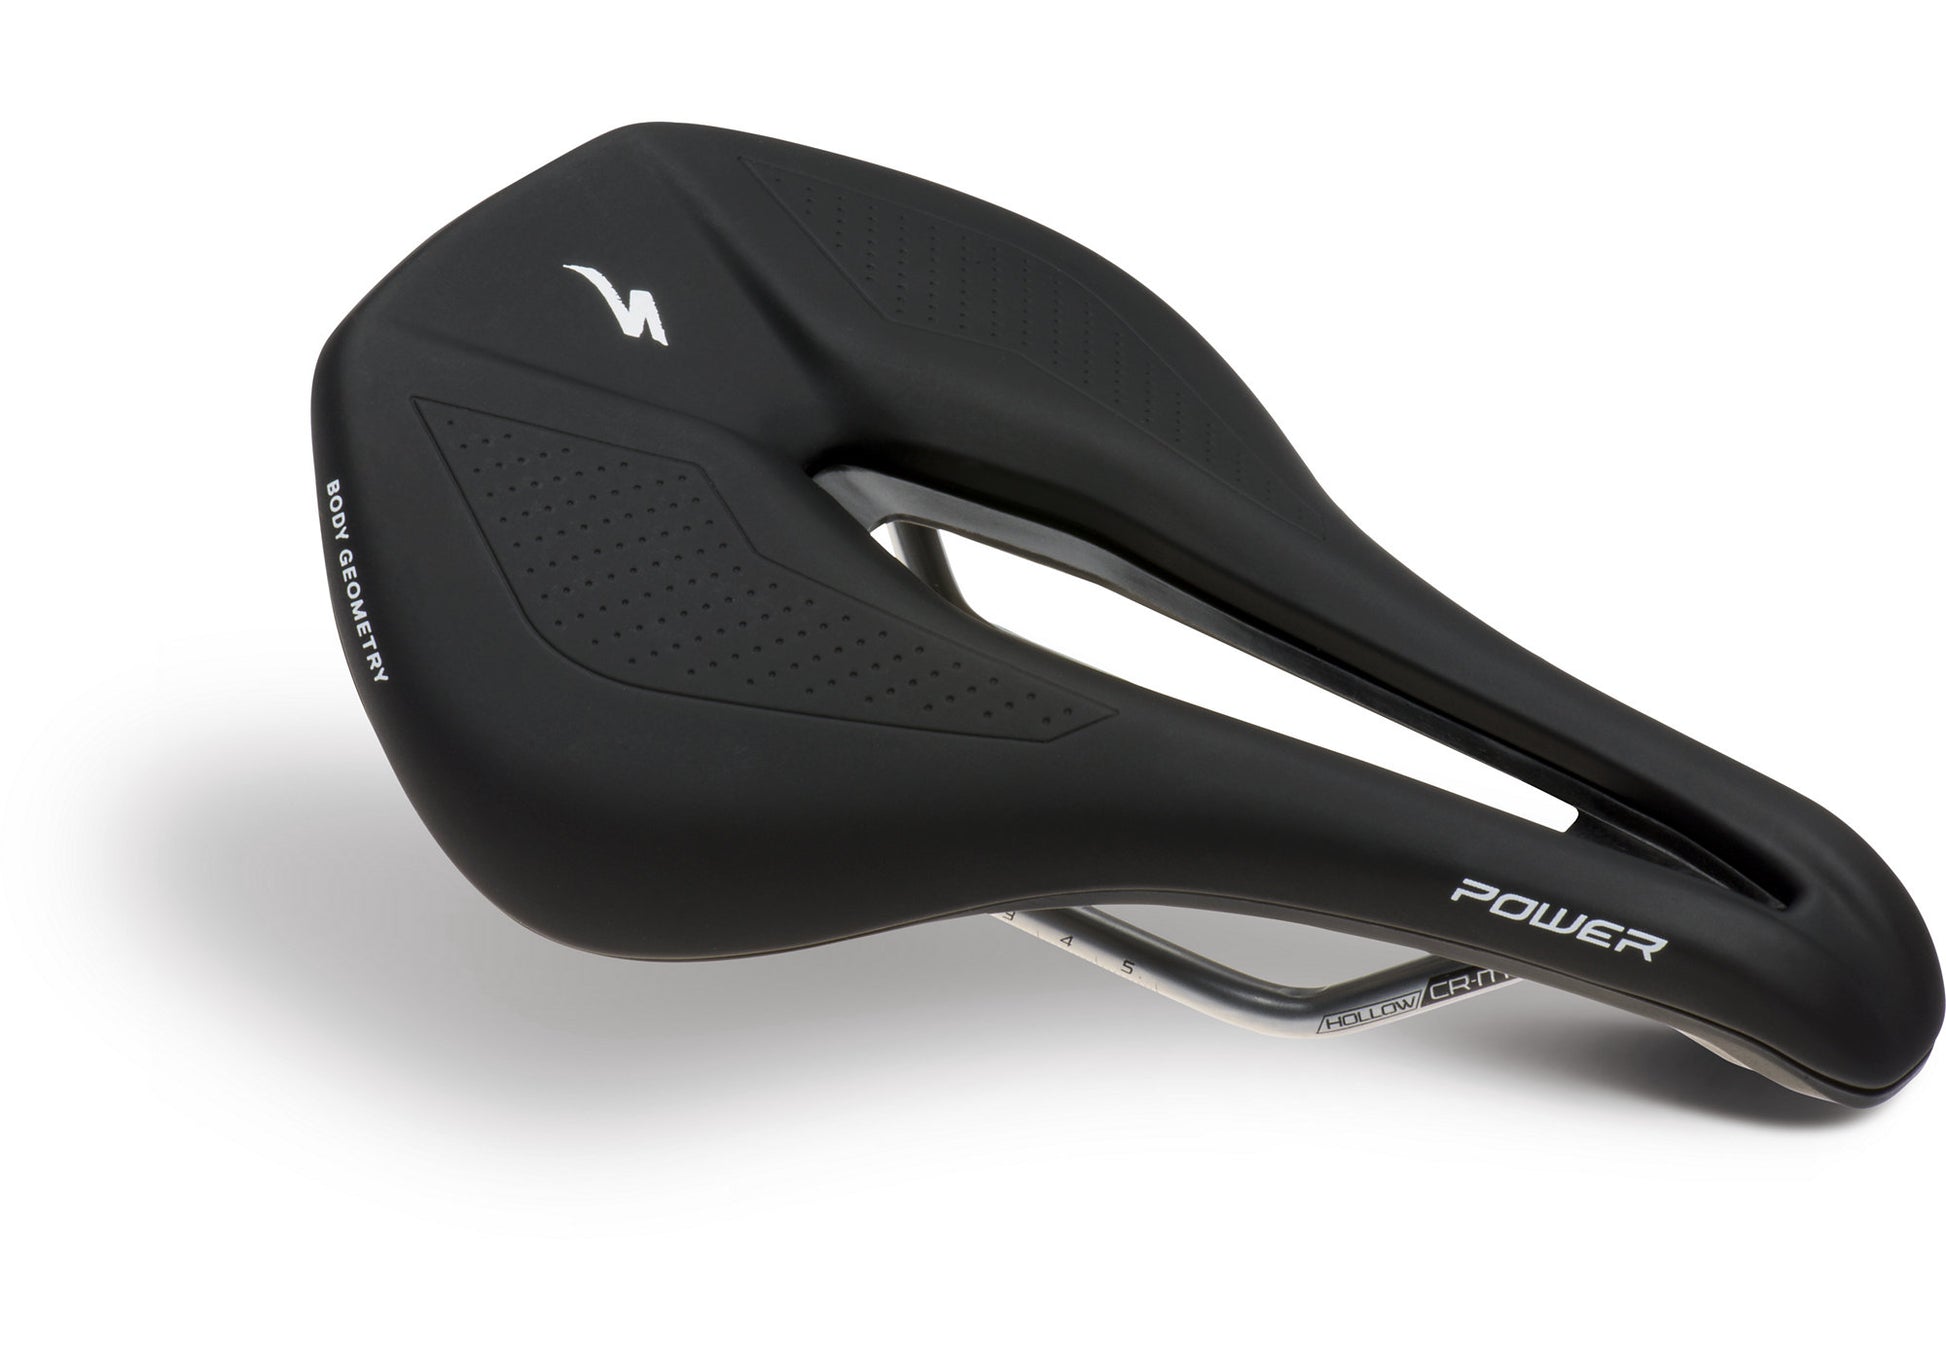 Specialized Meens/Womens Power Comp Road Bike Saddle, Black